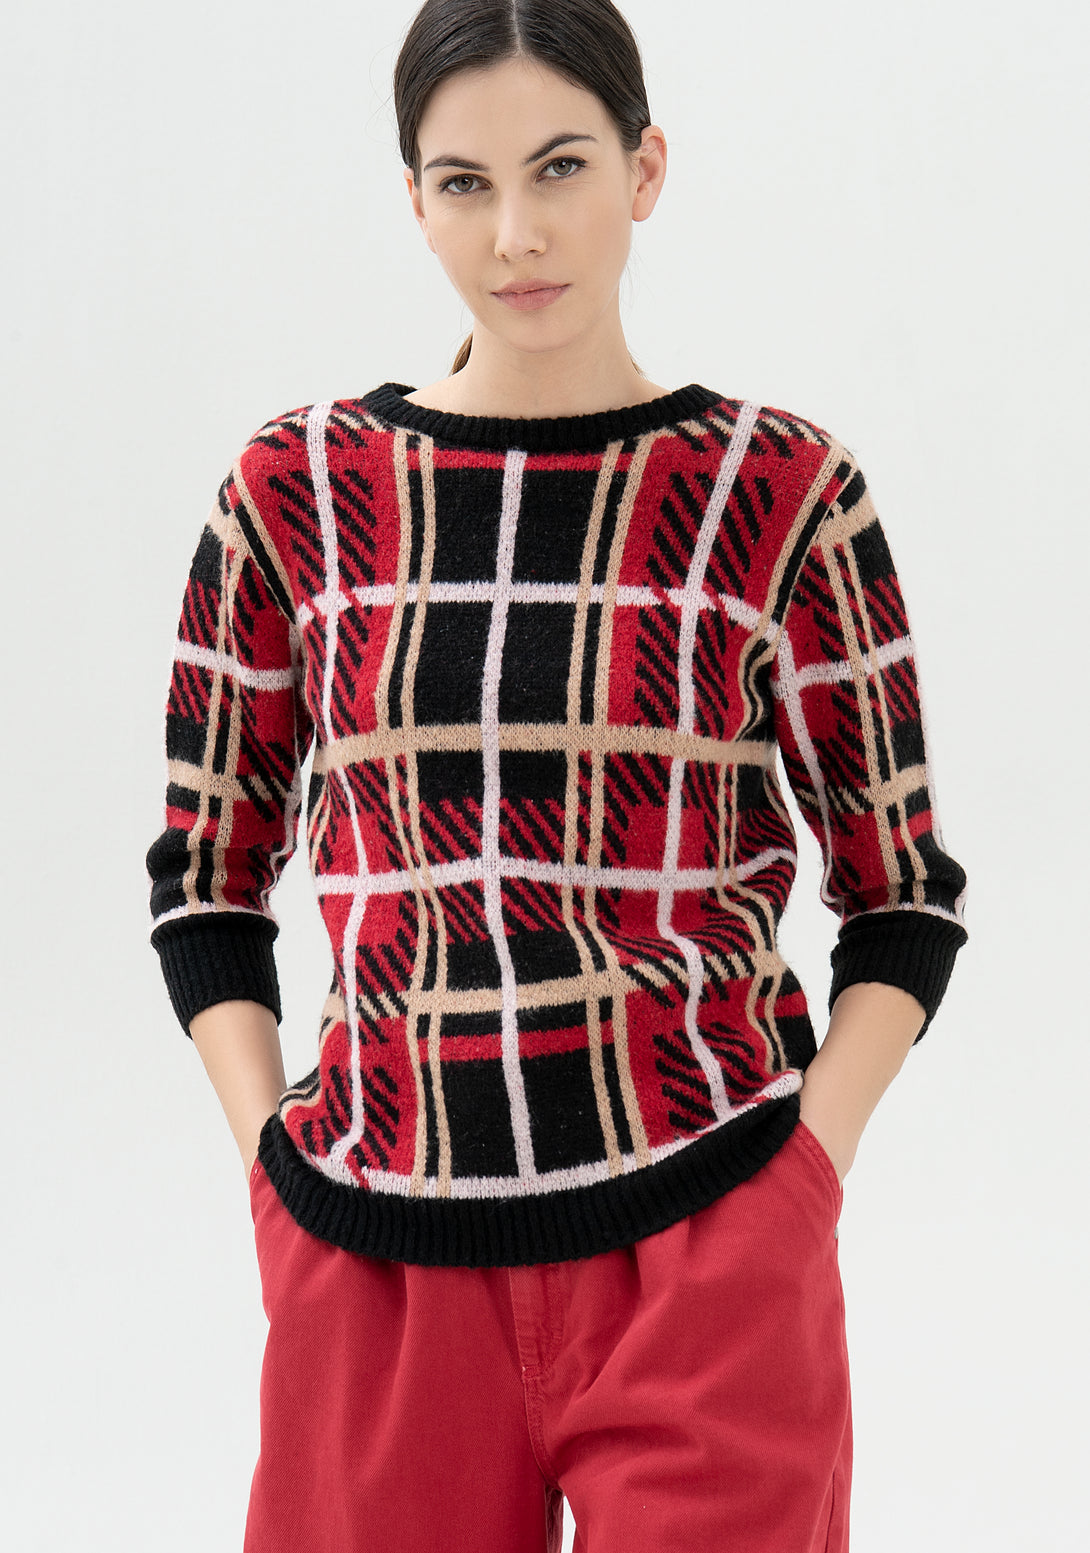 Knitwear regular fit made with squared jacquard effect